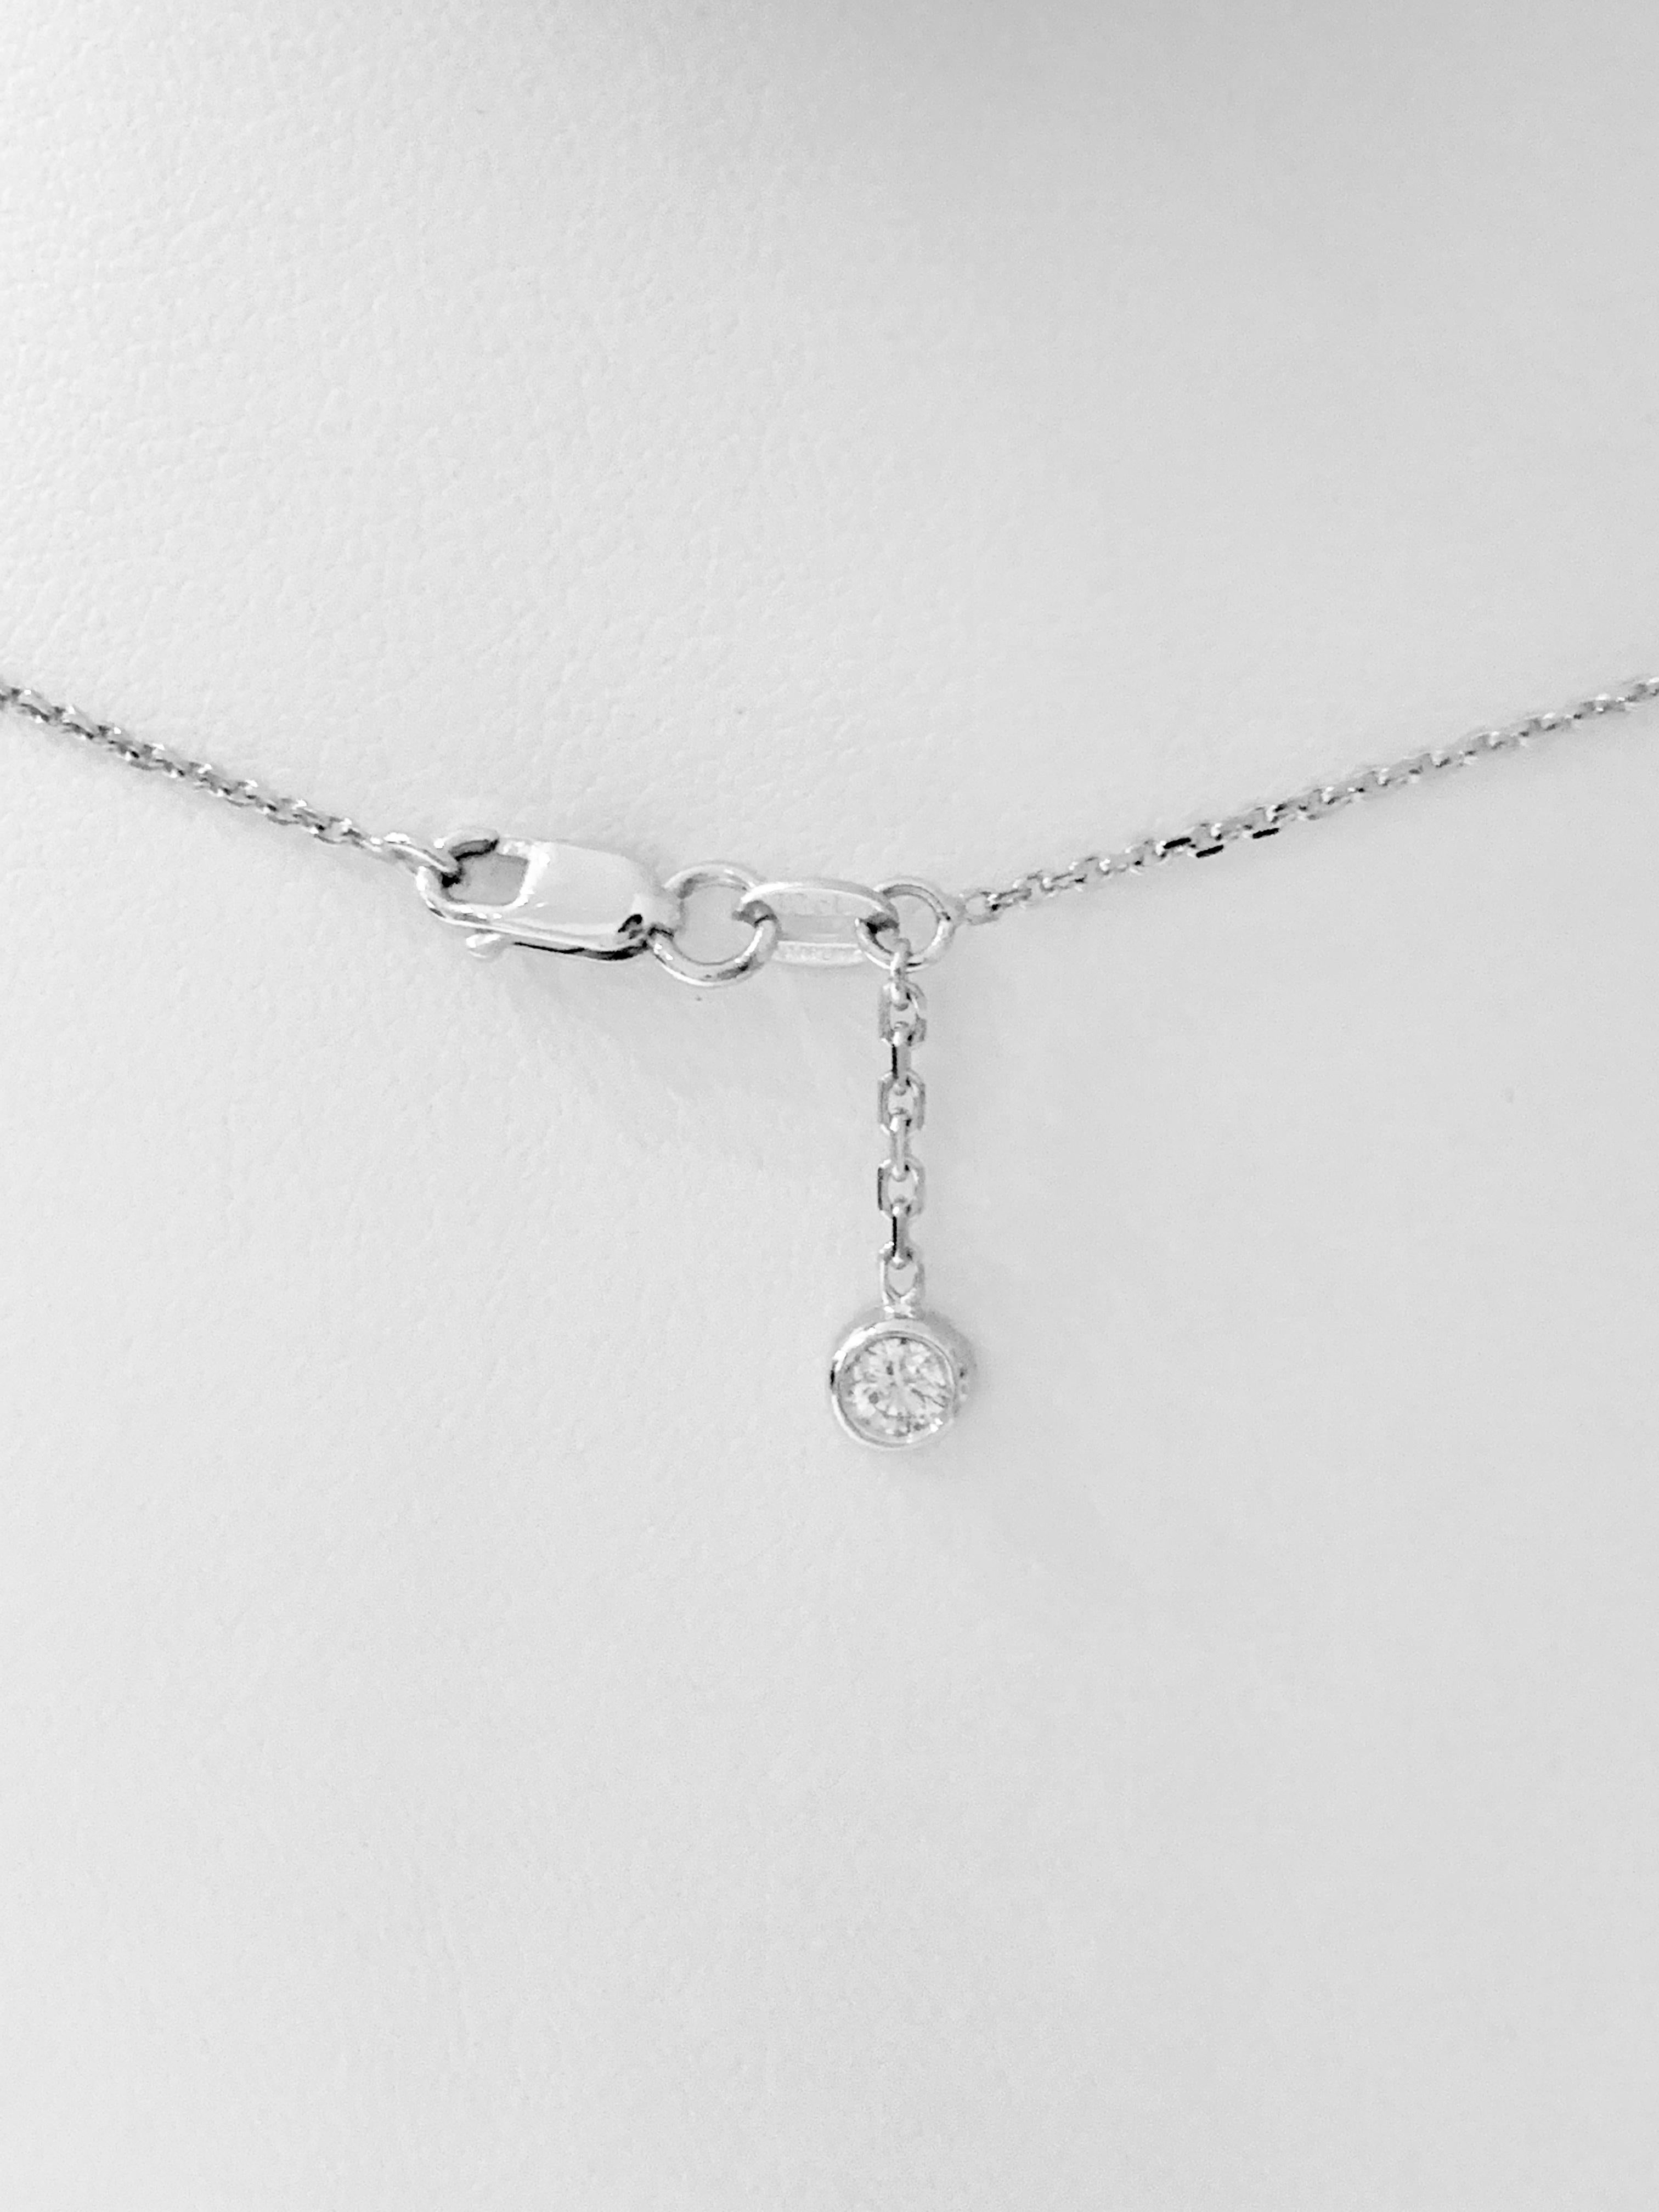 .41 Carat Brilliant Cut Diamond Bezel Set Necklace in 18 Carat White Gold In New Condition For Sale In Chislehurst, Kent